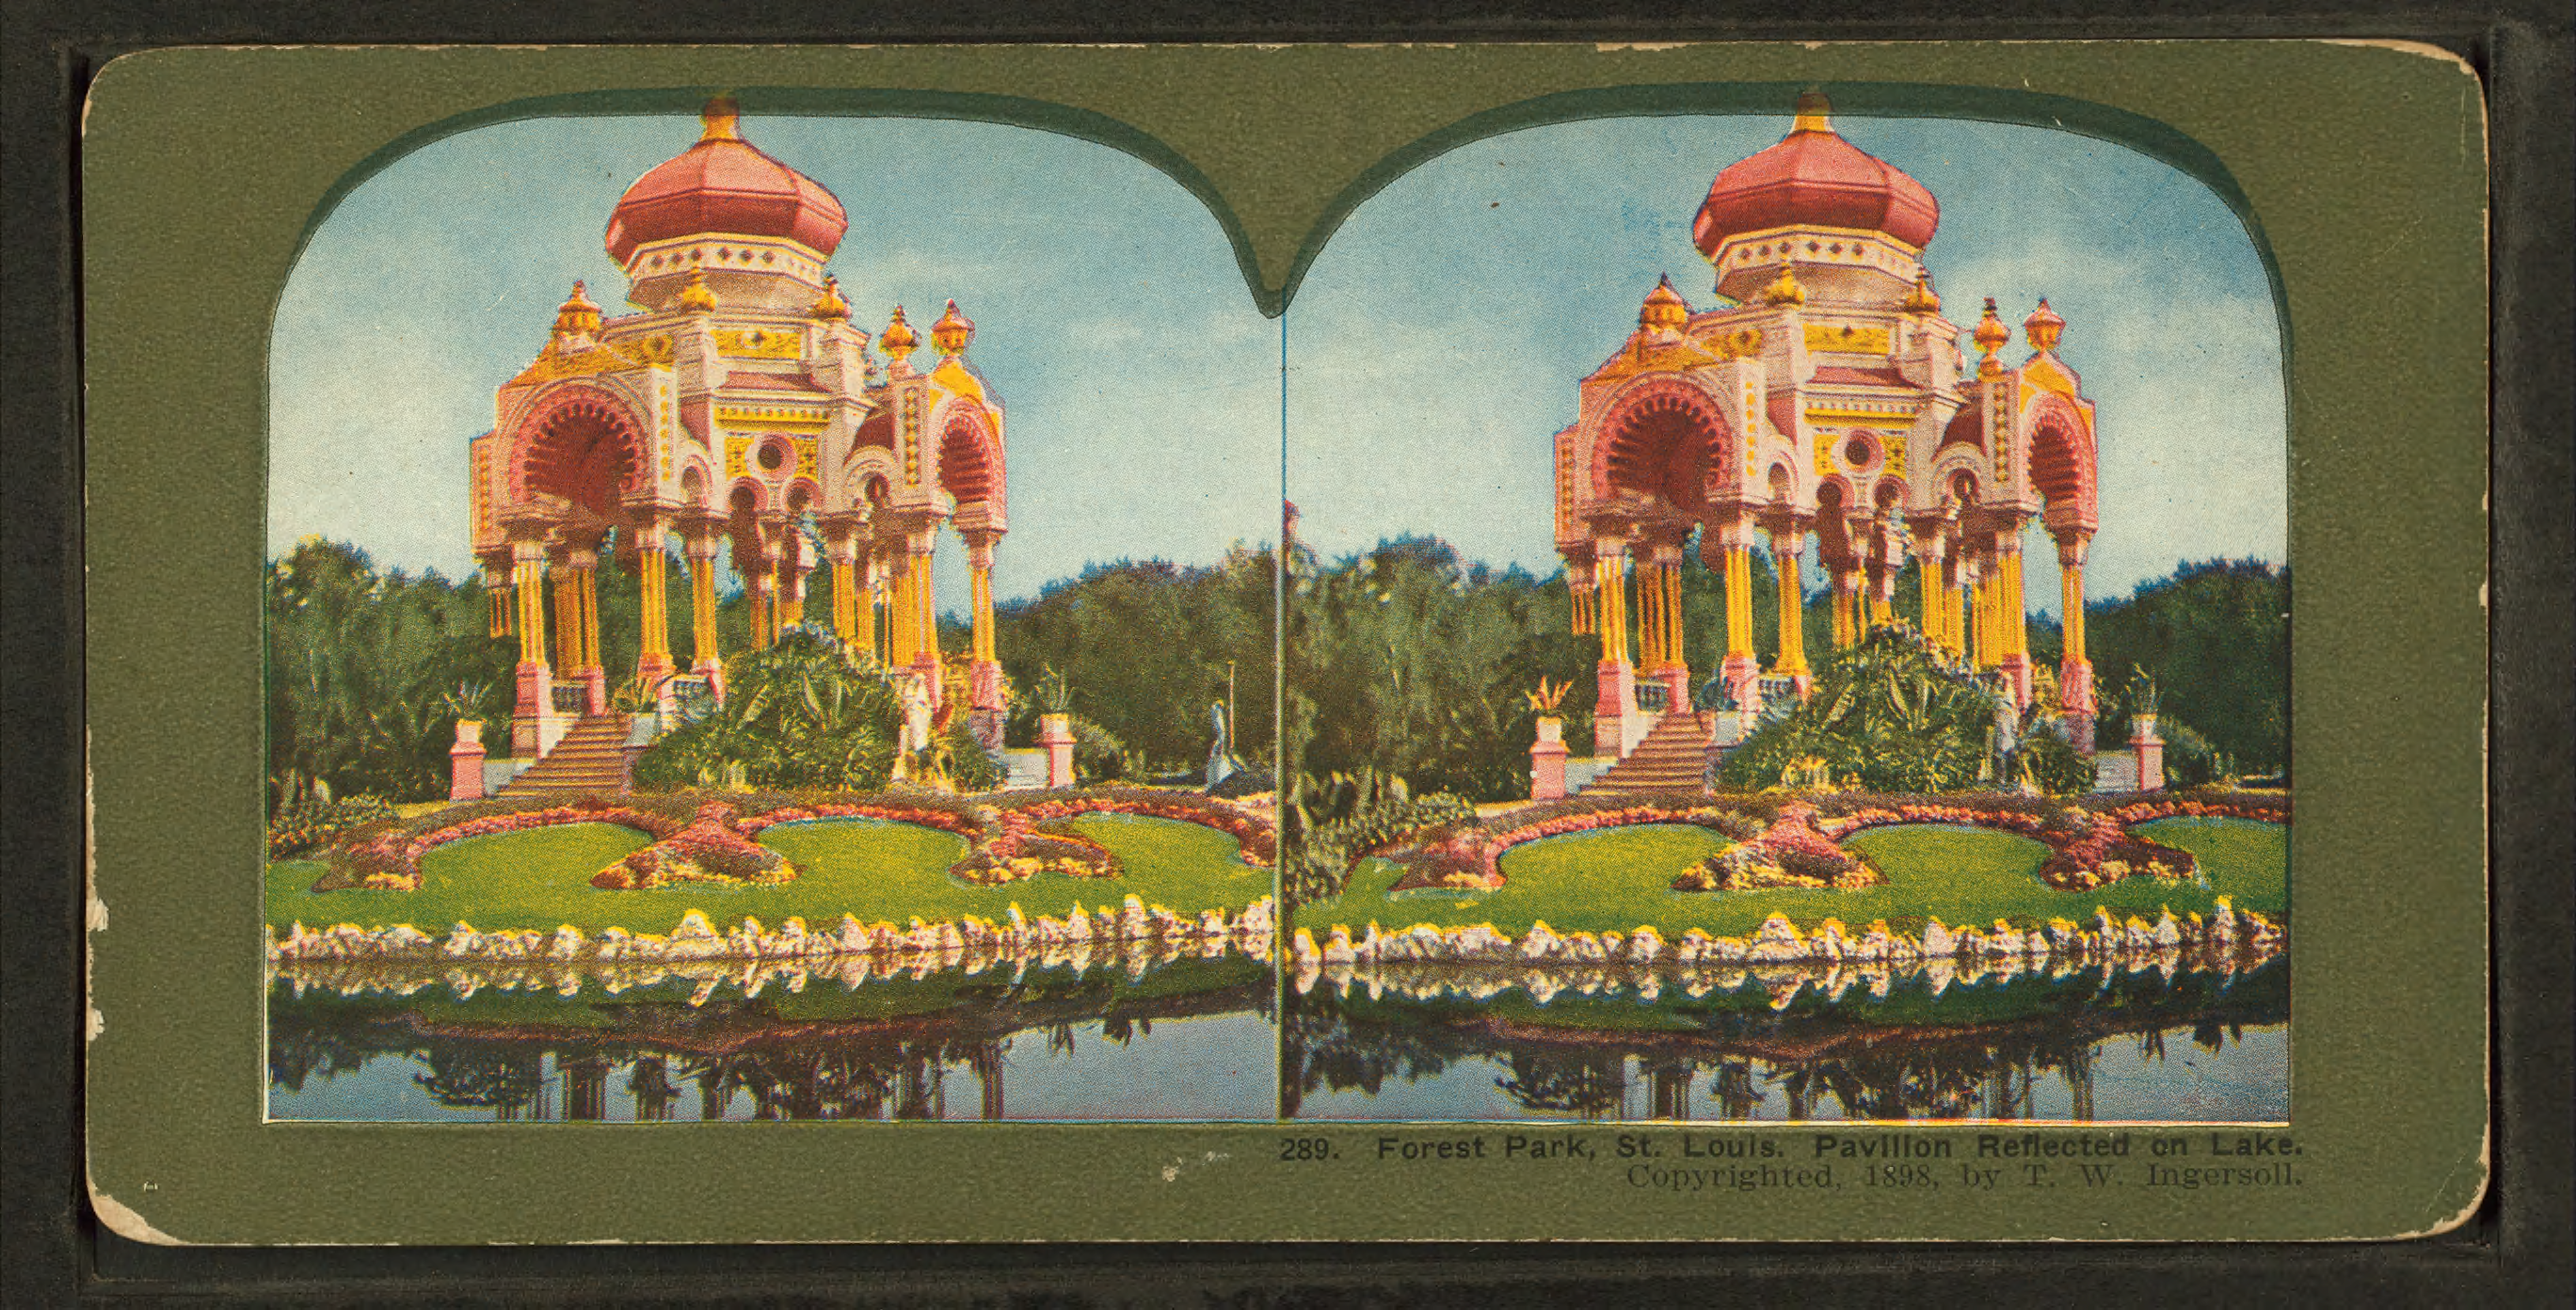 File:Forest Park, St. Louis. Pavillion reflected on lake, by Ingersoll, T. W. (Truman Ward ...